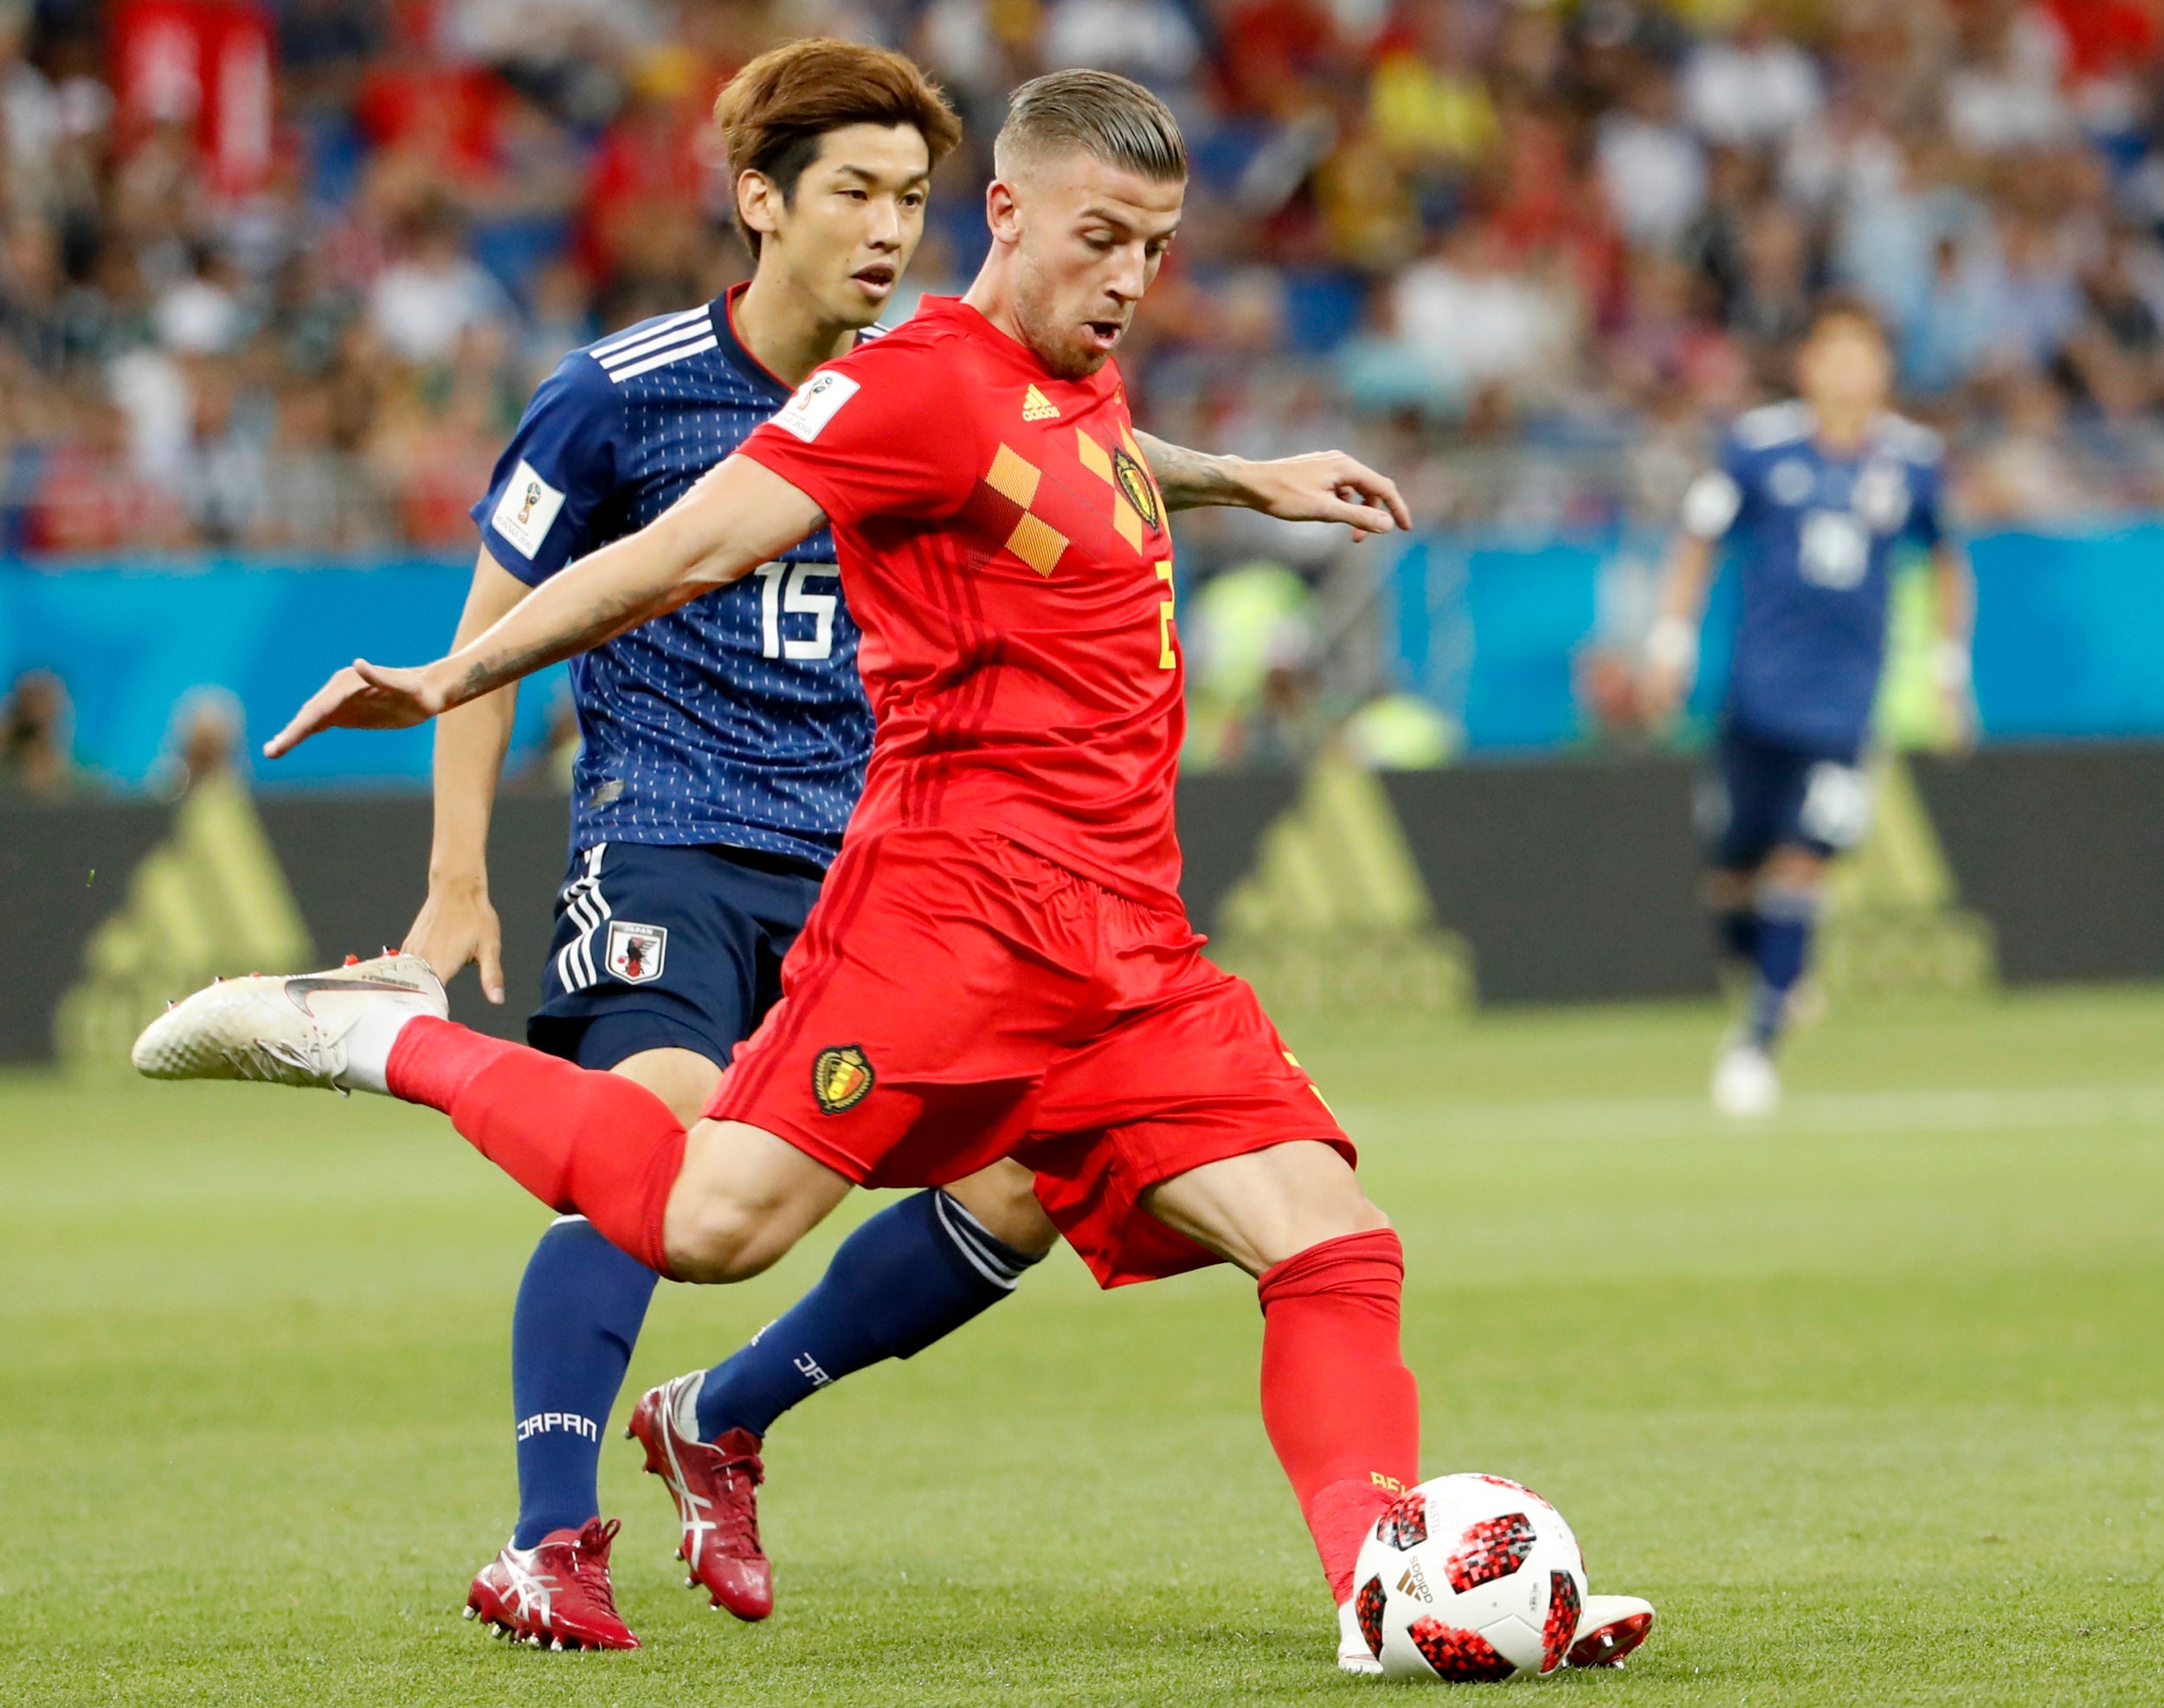 Alderweireld is yet to return to Spurs after featuring at the World Cup